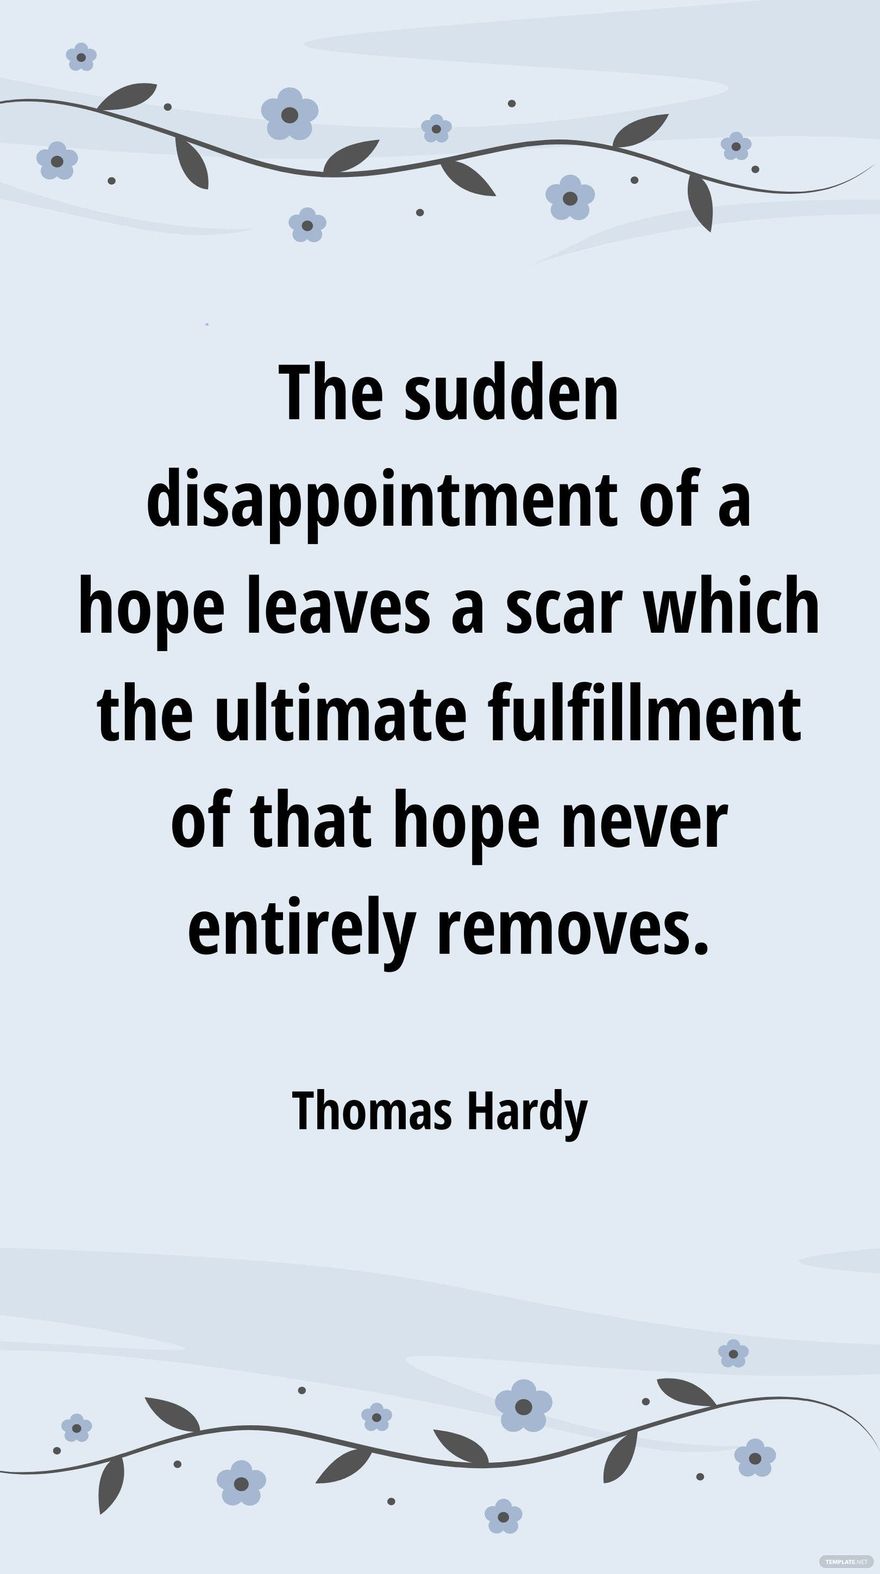 Free Thomas Hardy - The sudden disappointment of a hope leaves a scar which the ultimate fulfillment of that hope never entirely removes.